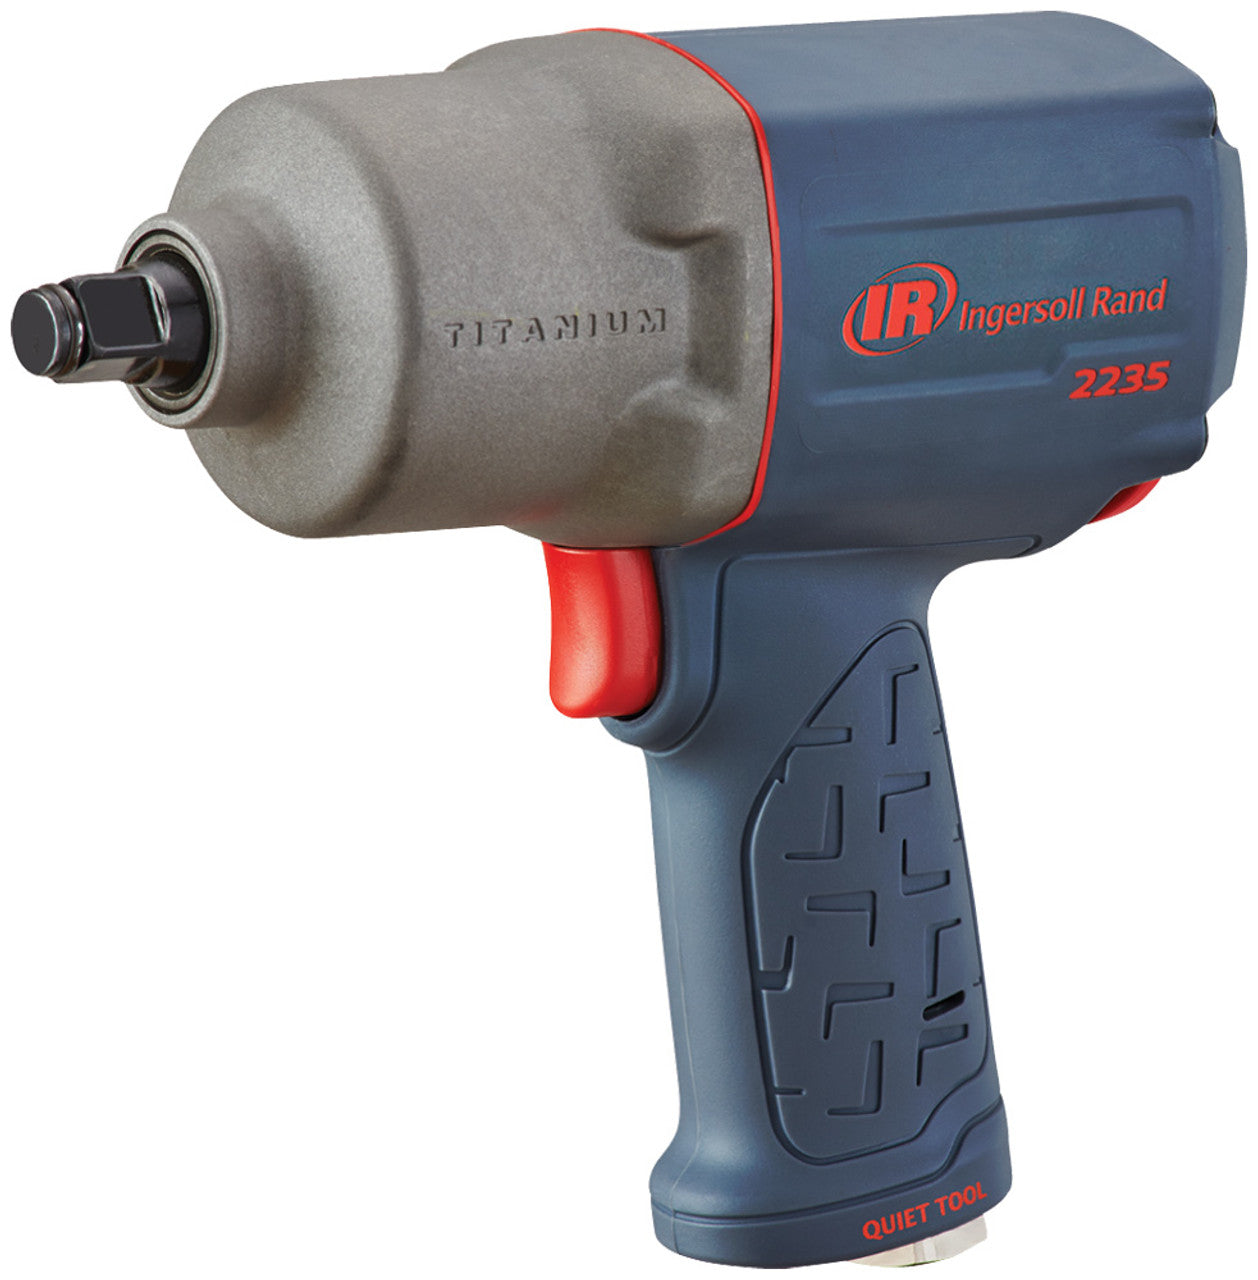 Ingersoll Rand 2235QTiMAX 1/2" Square Drive Quiet Air Impactool + FREE Ingersoll Rand 36QMAX 1/2 Ultra Compact Impact Wrench